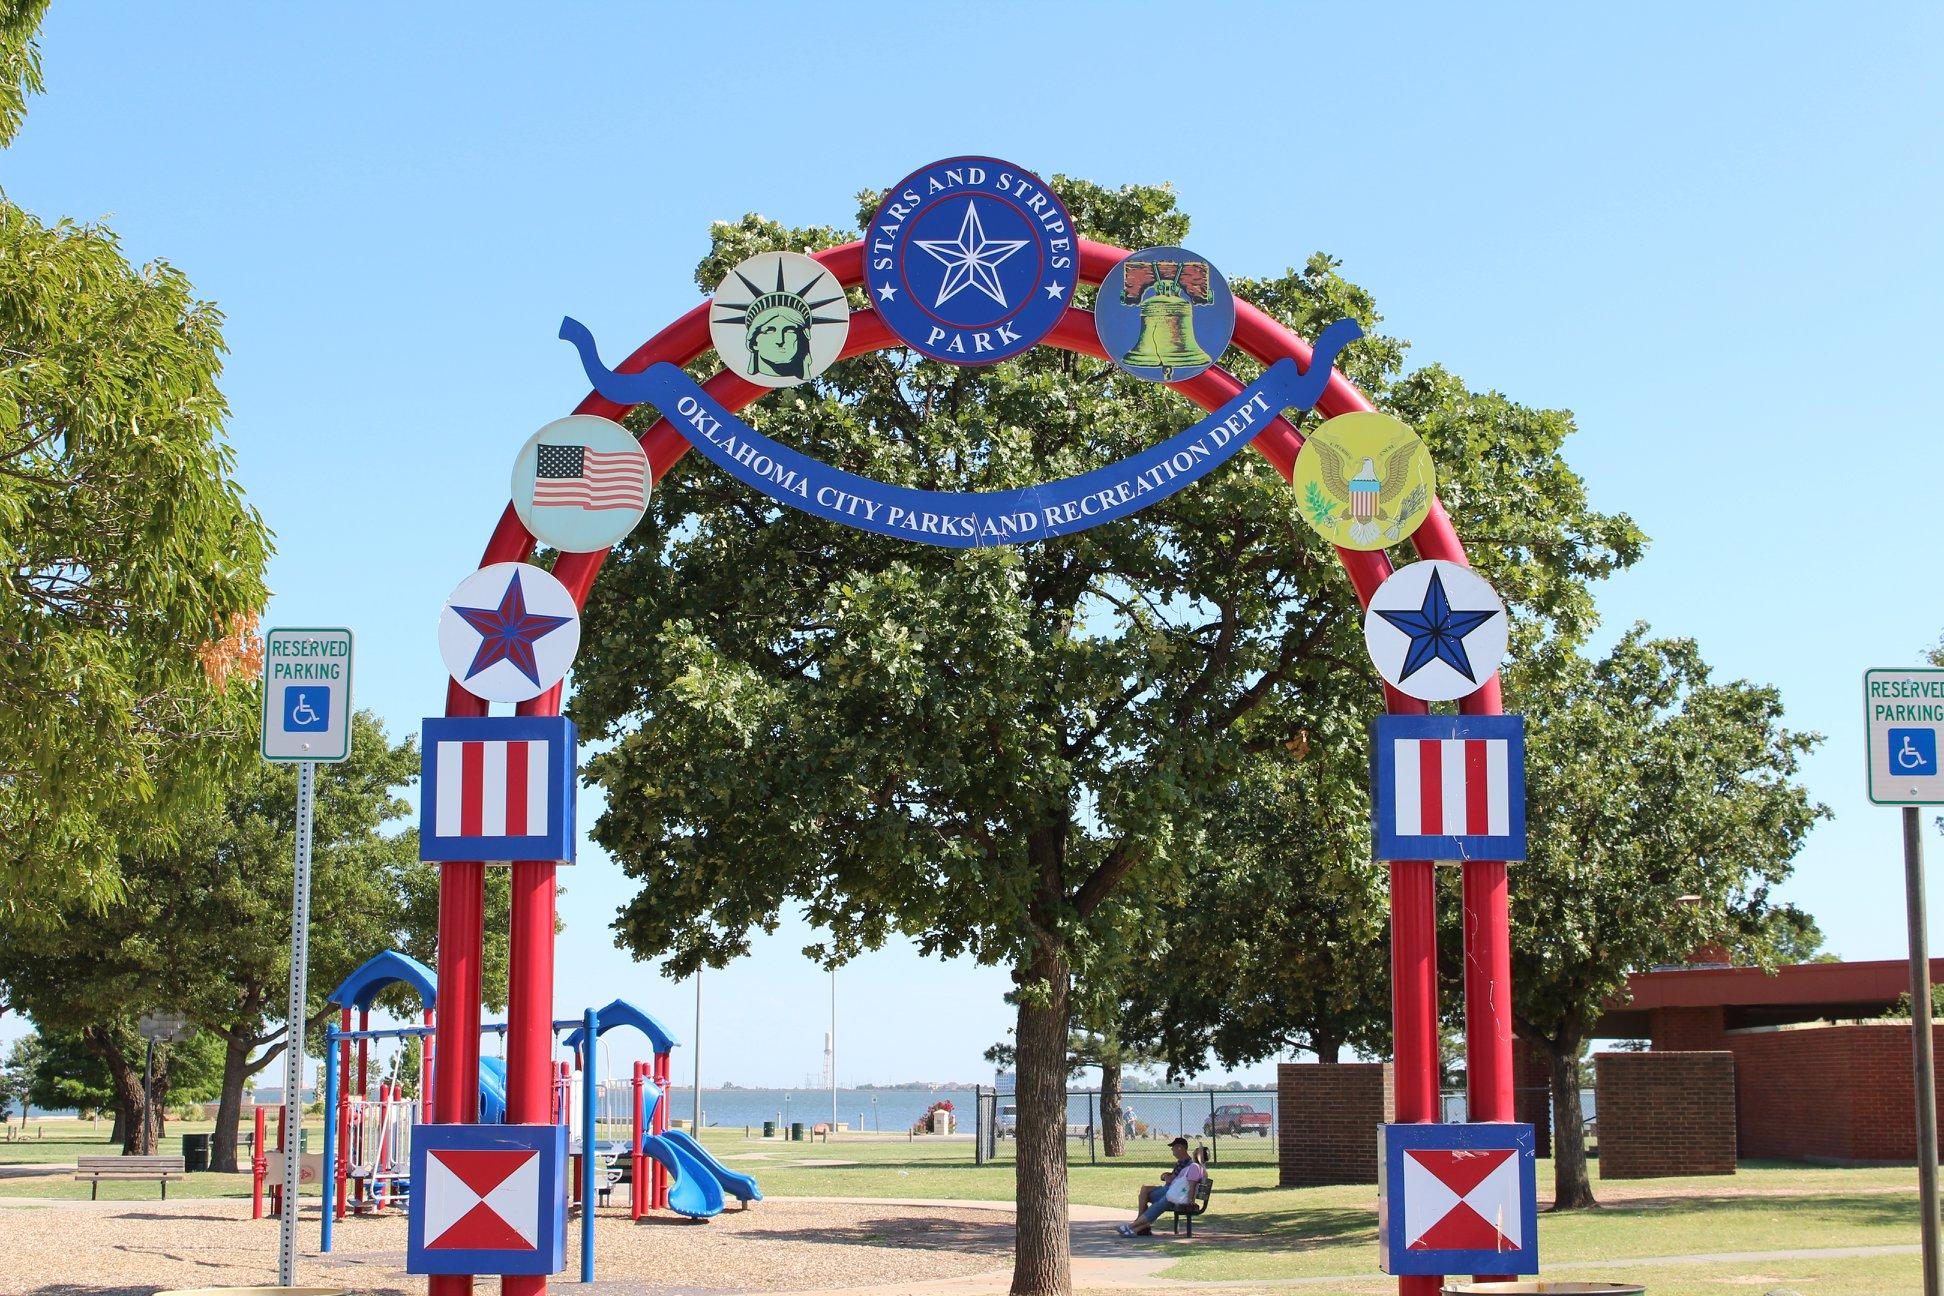 Best Parks and Playgrounds OKC